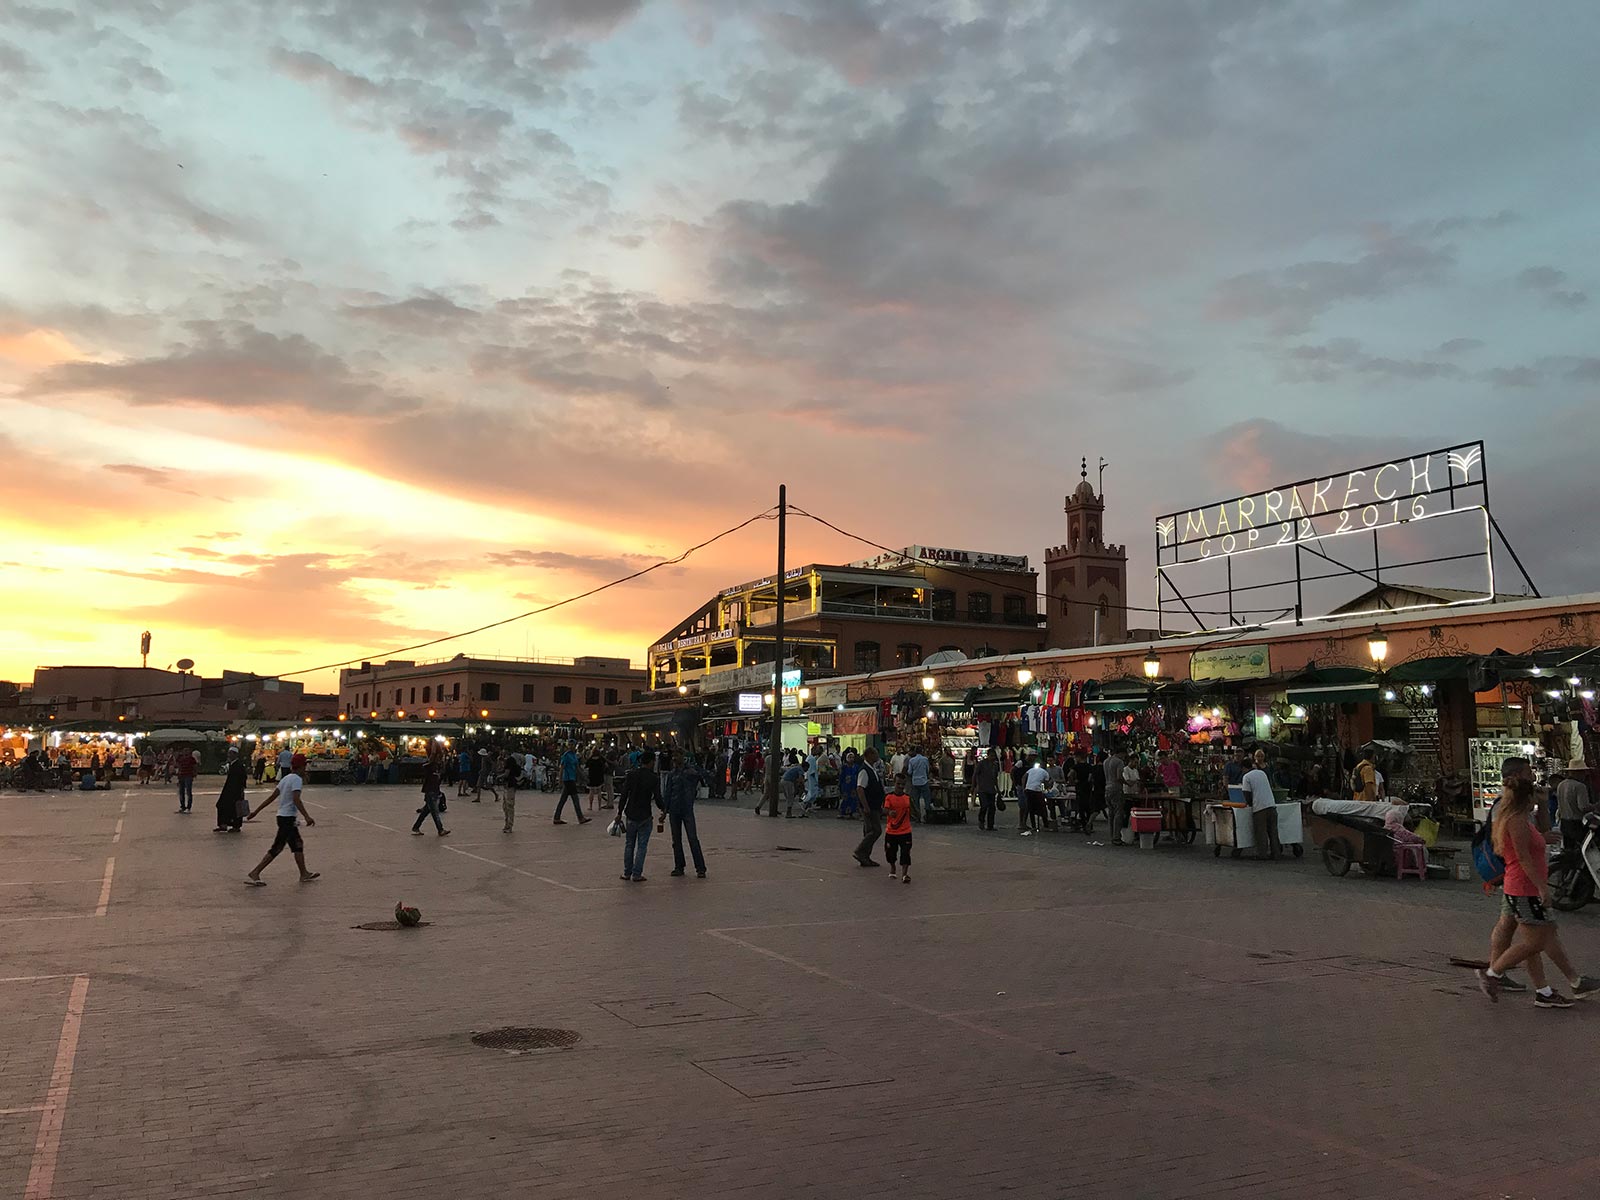 Sunset at the market in Marrakesh, Morocco. Being attacked by a man with a snake